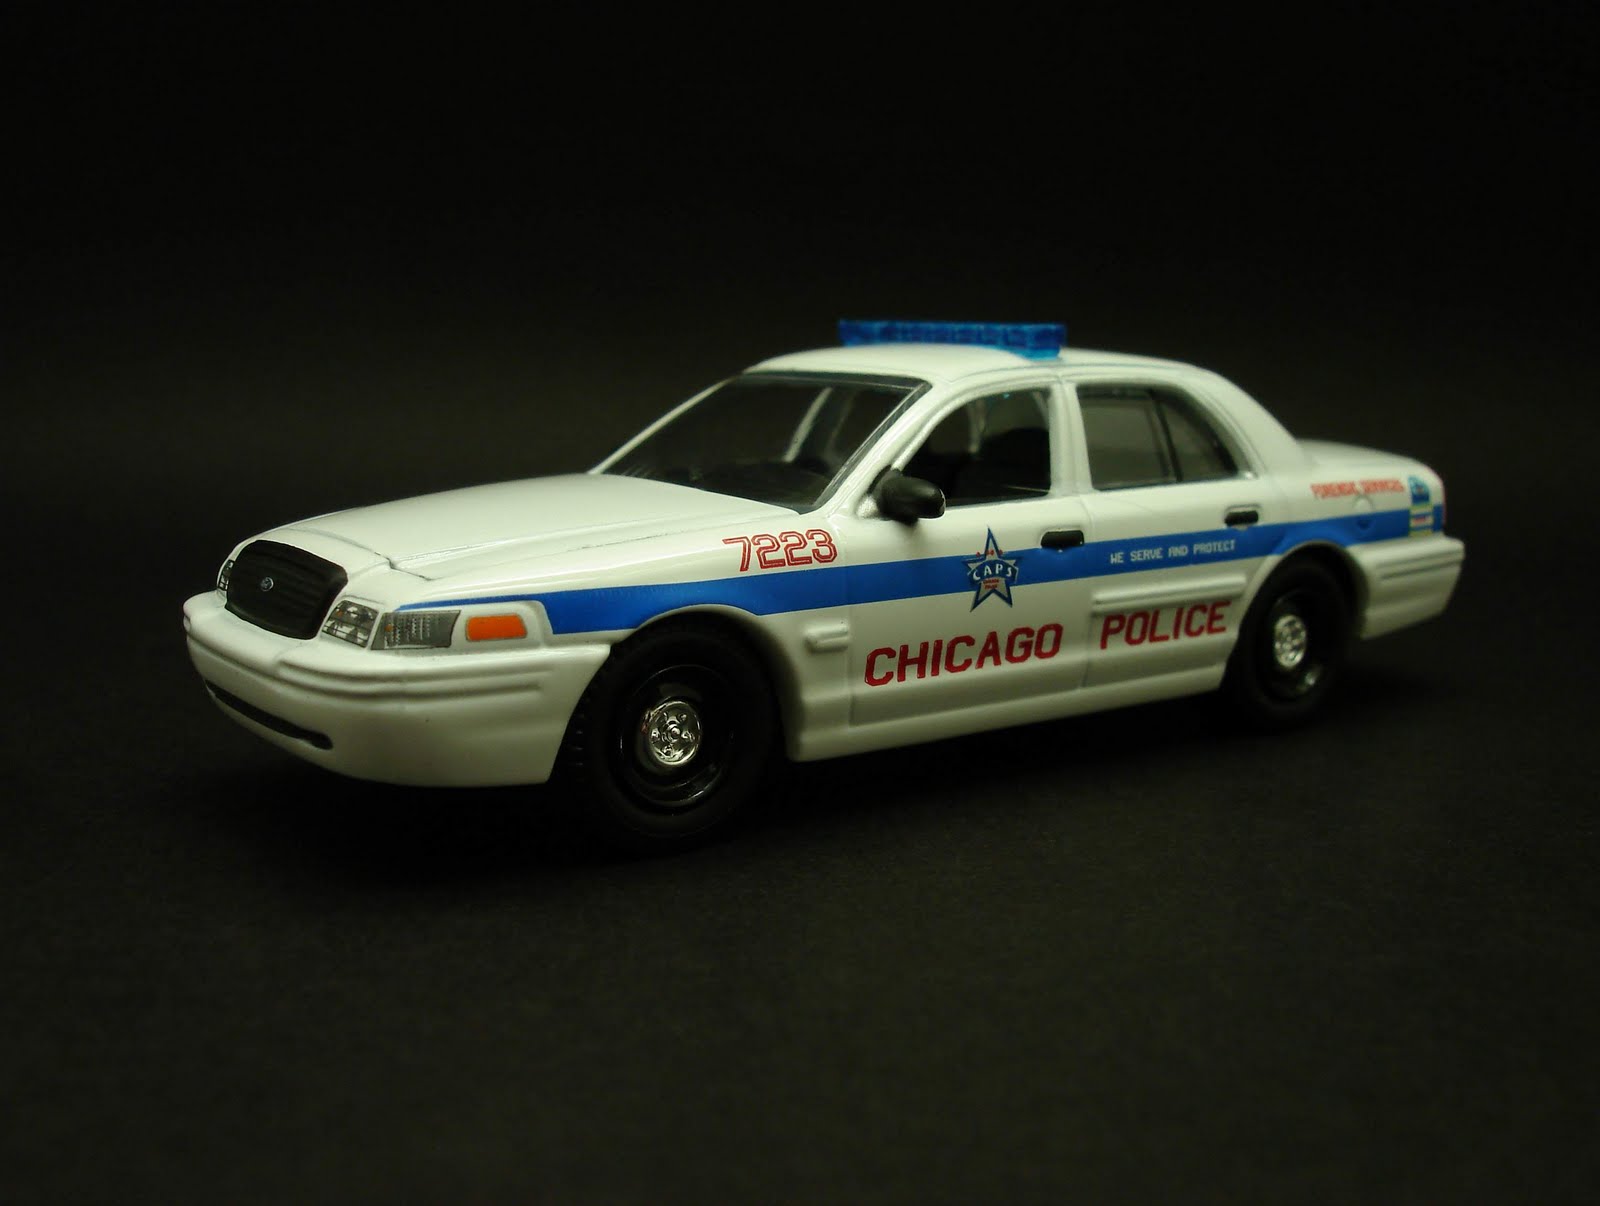 2008 Ford Crown Victoria Chicago, IL Police Forensic Services Car #7223.